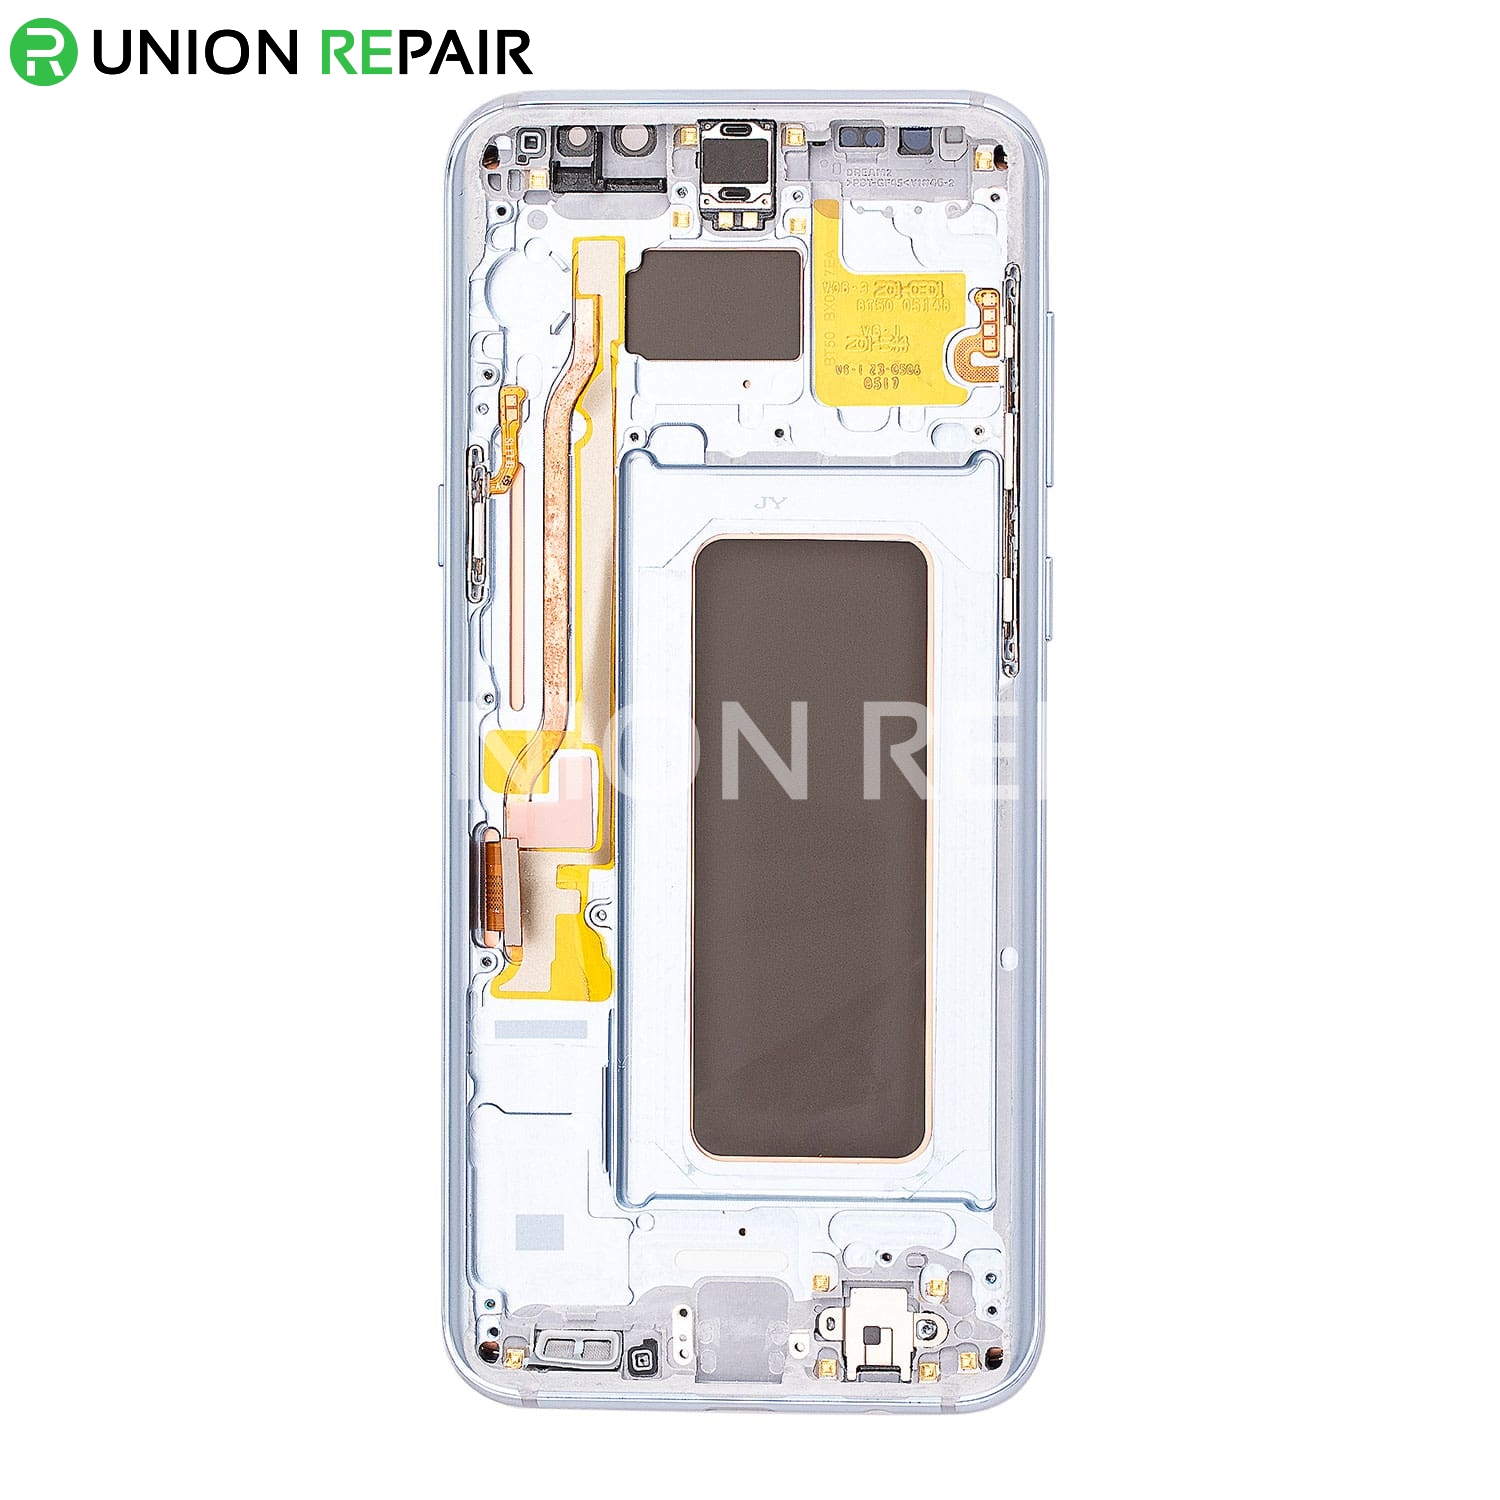 Replacement for Samsung Galaxy S8 Plus SM-G955 LCD Screen Assembly - Coral Blue